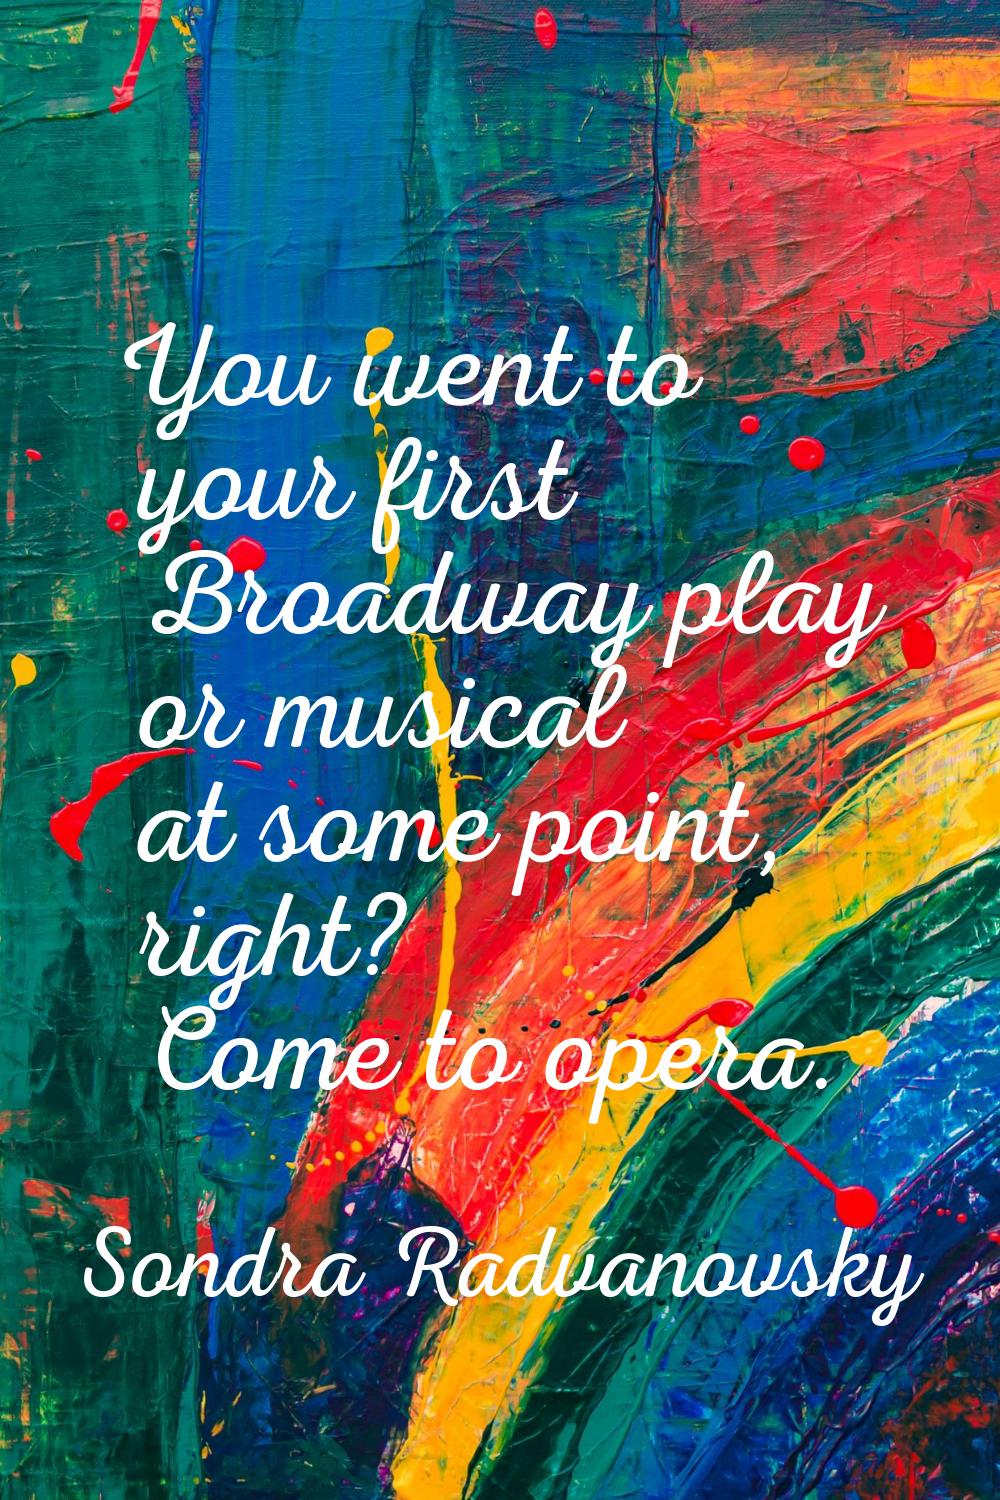 You went to your first Broadway play or musical at some point, right? Come to opera.